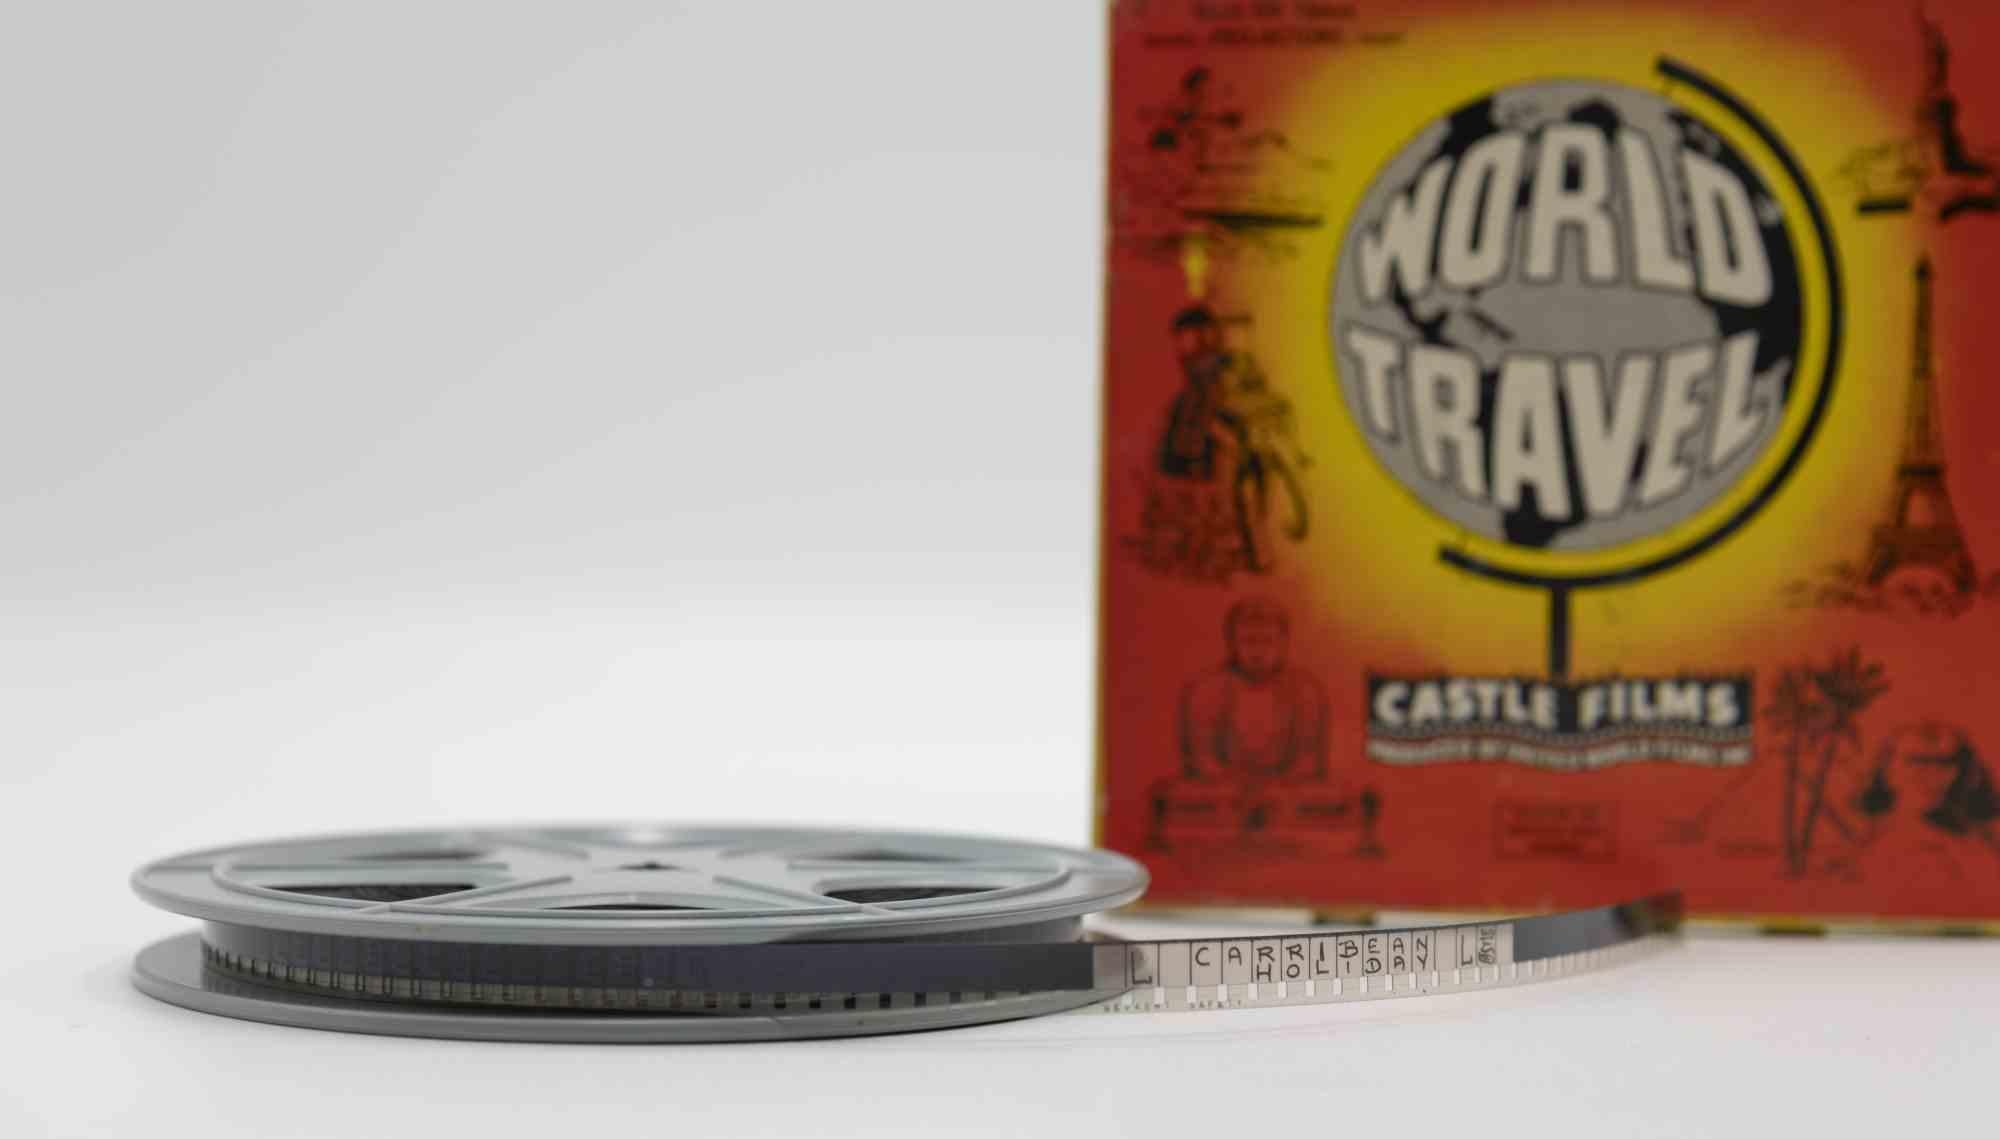 World travel  is an original film from the 1960s.

Complete edition, Castle films.

It includes original packaging.

8 mm.

Good conditions. 